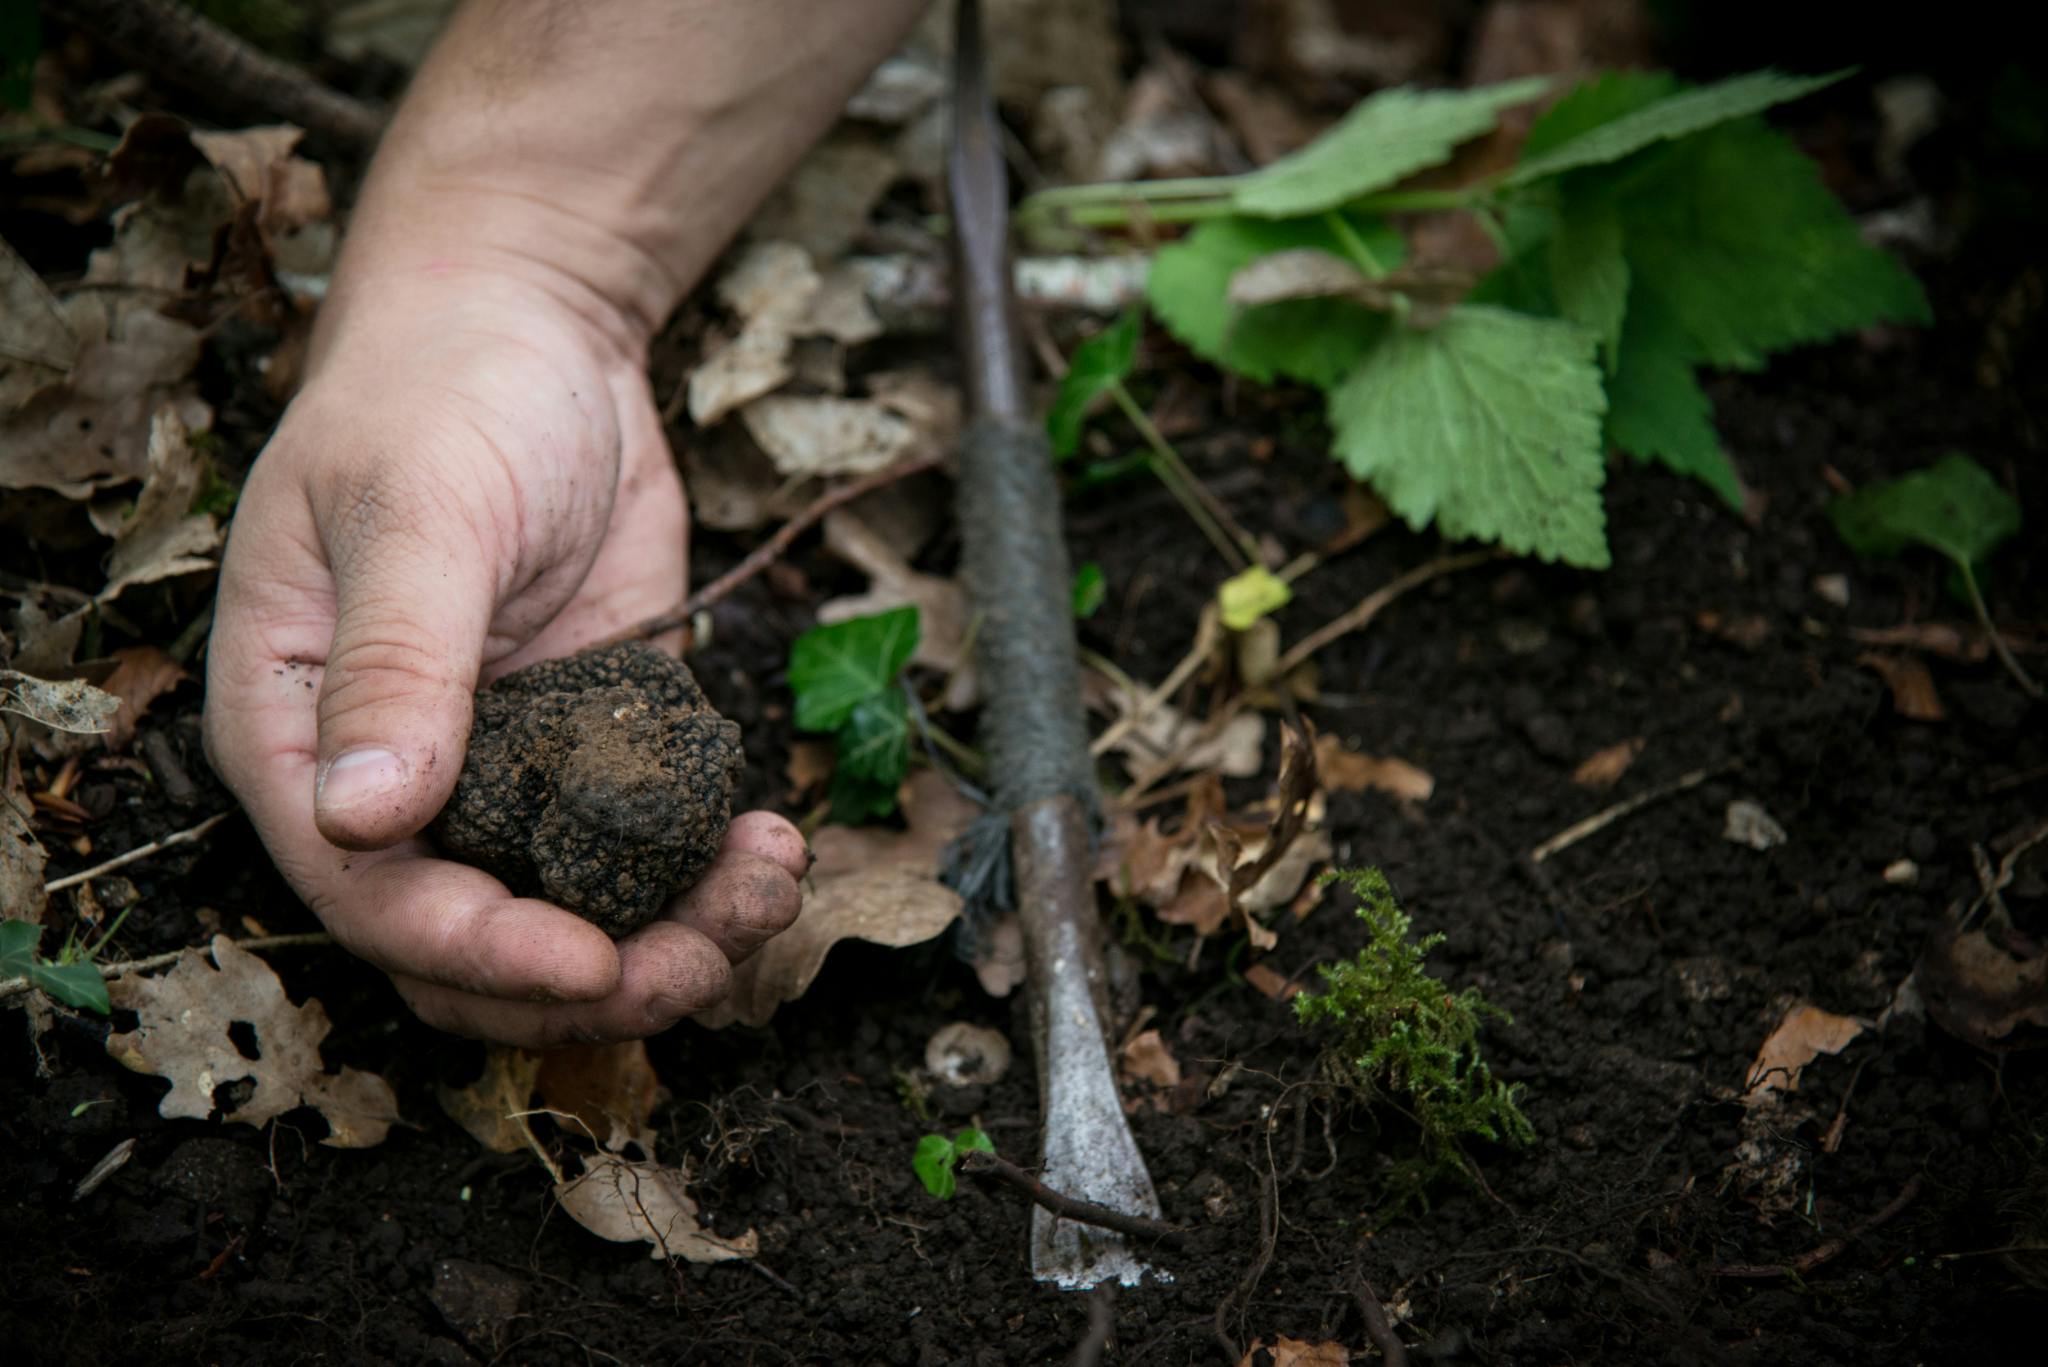 Burgundy truffle hunting demonstration and lunch Musement